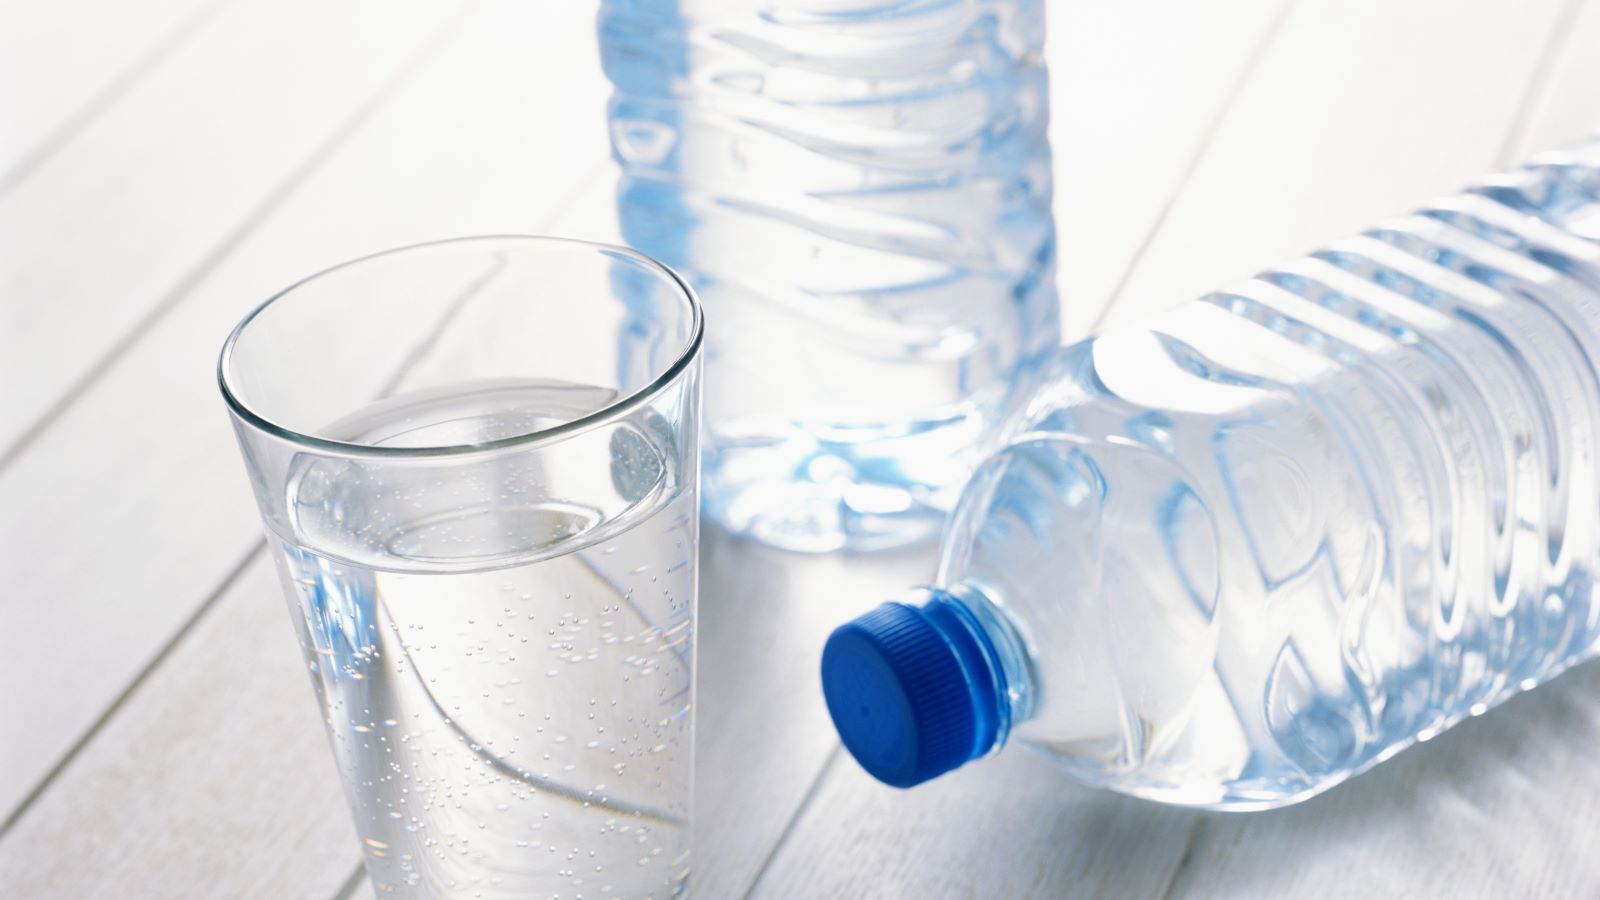 Could alkaline water be the key to getting acid reflux under control? We asked a gastroenterologist. Here's what he had to say.